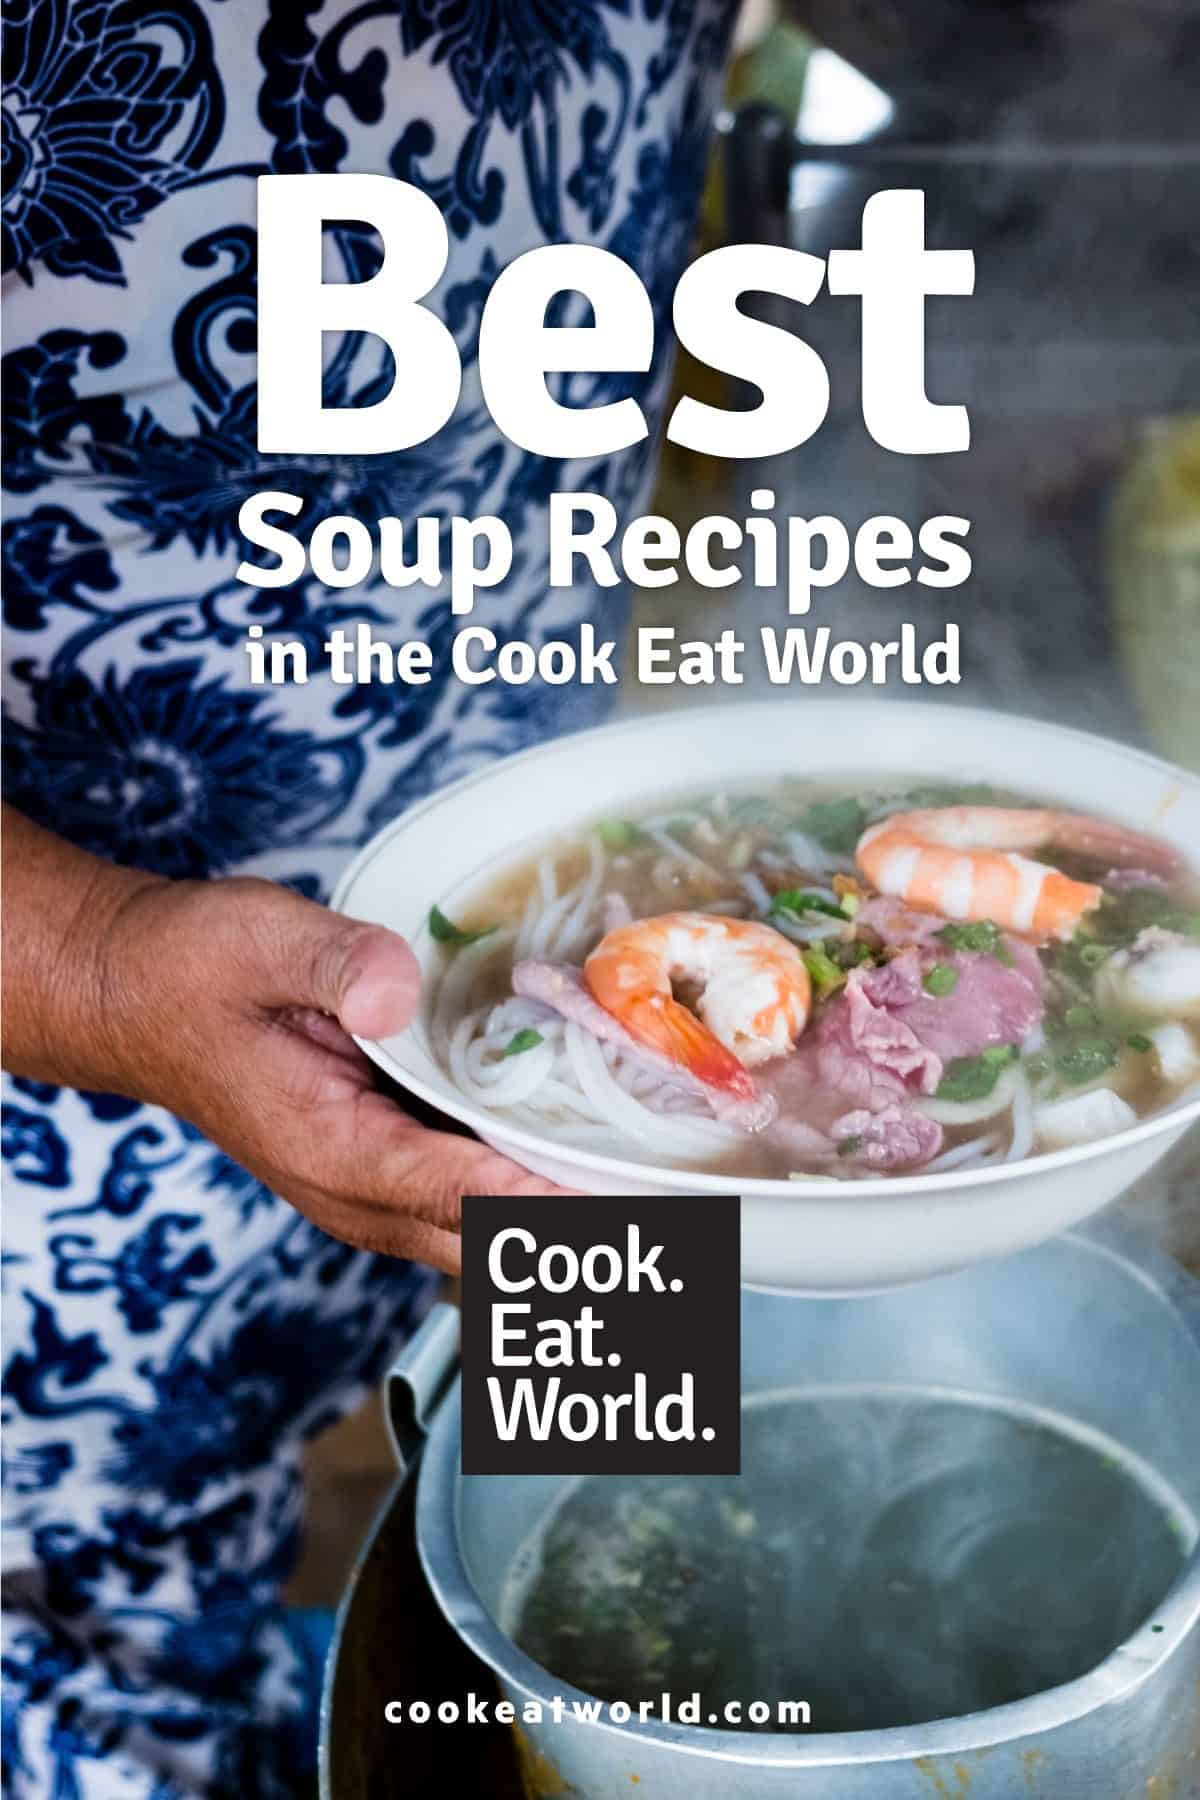 A close up photograph of a Vietnamese woman holding a bowl of Pho Soup with shrimp, beef and noodles - leading to a post about the best soup recipes from www.cookeatworld.com